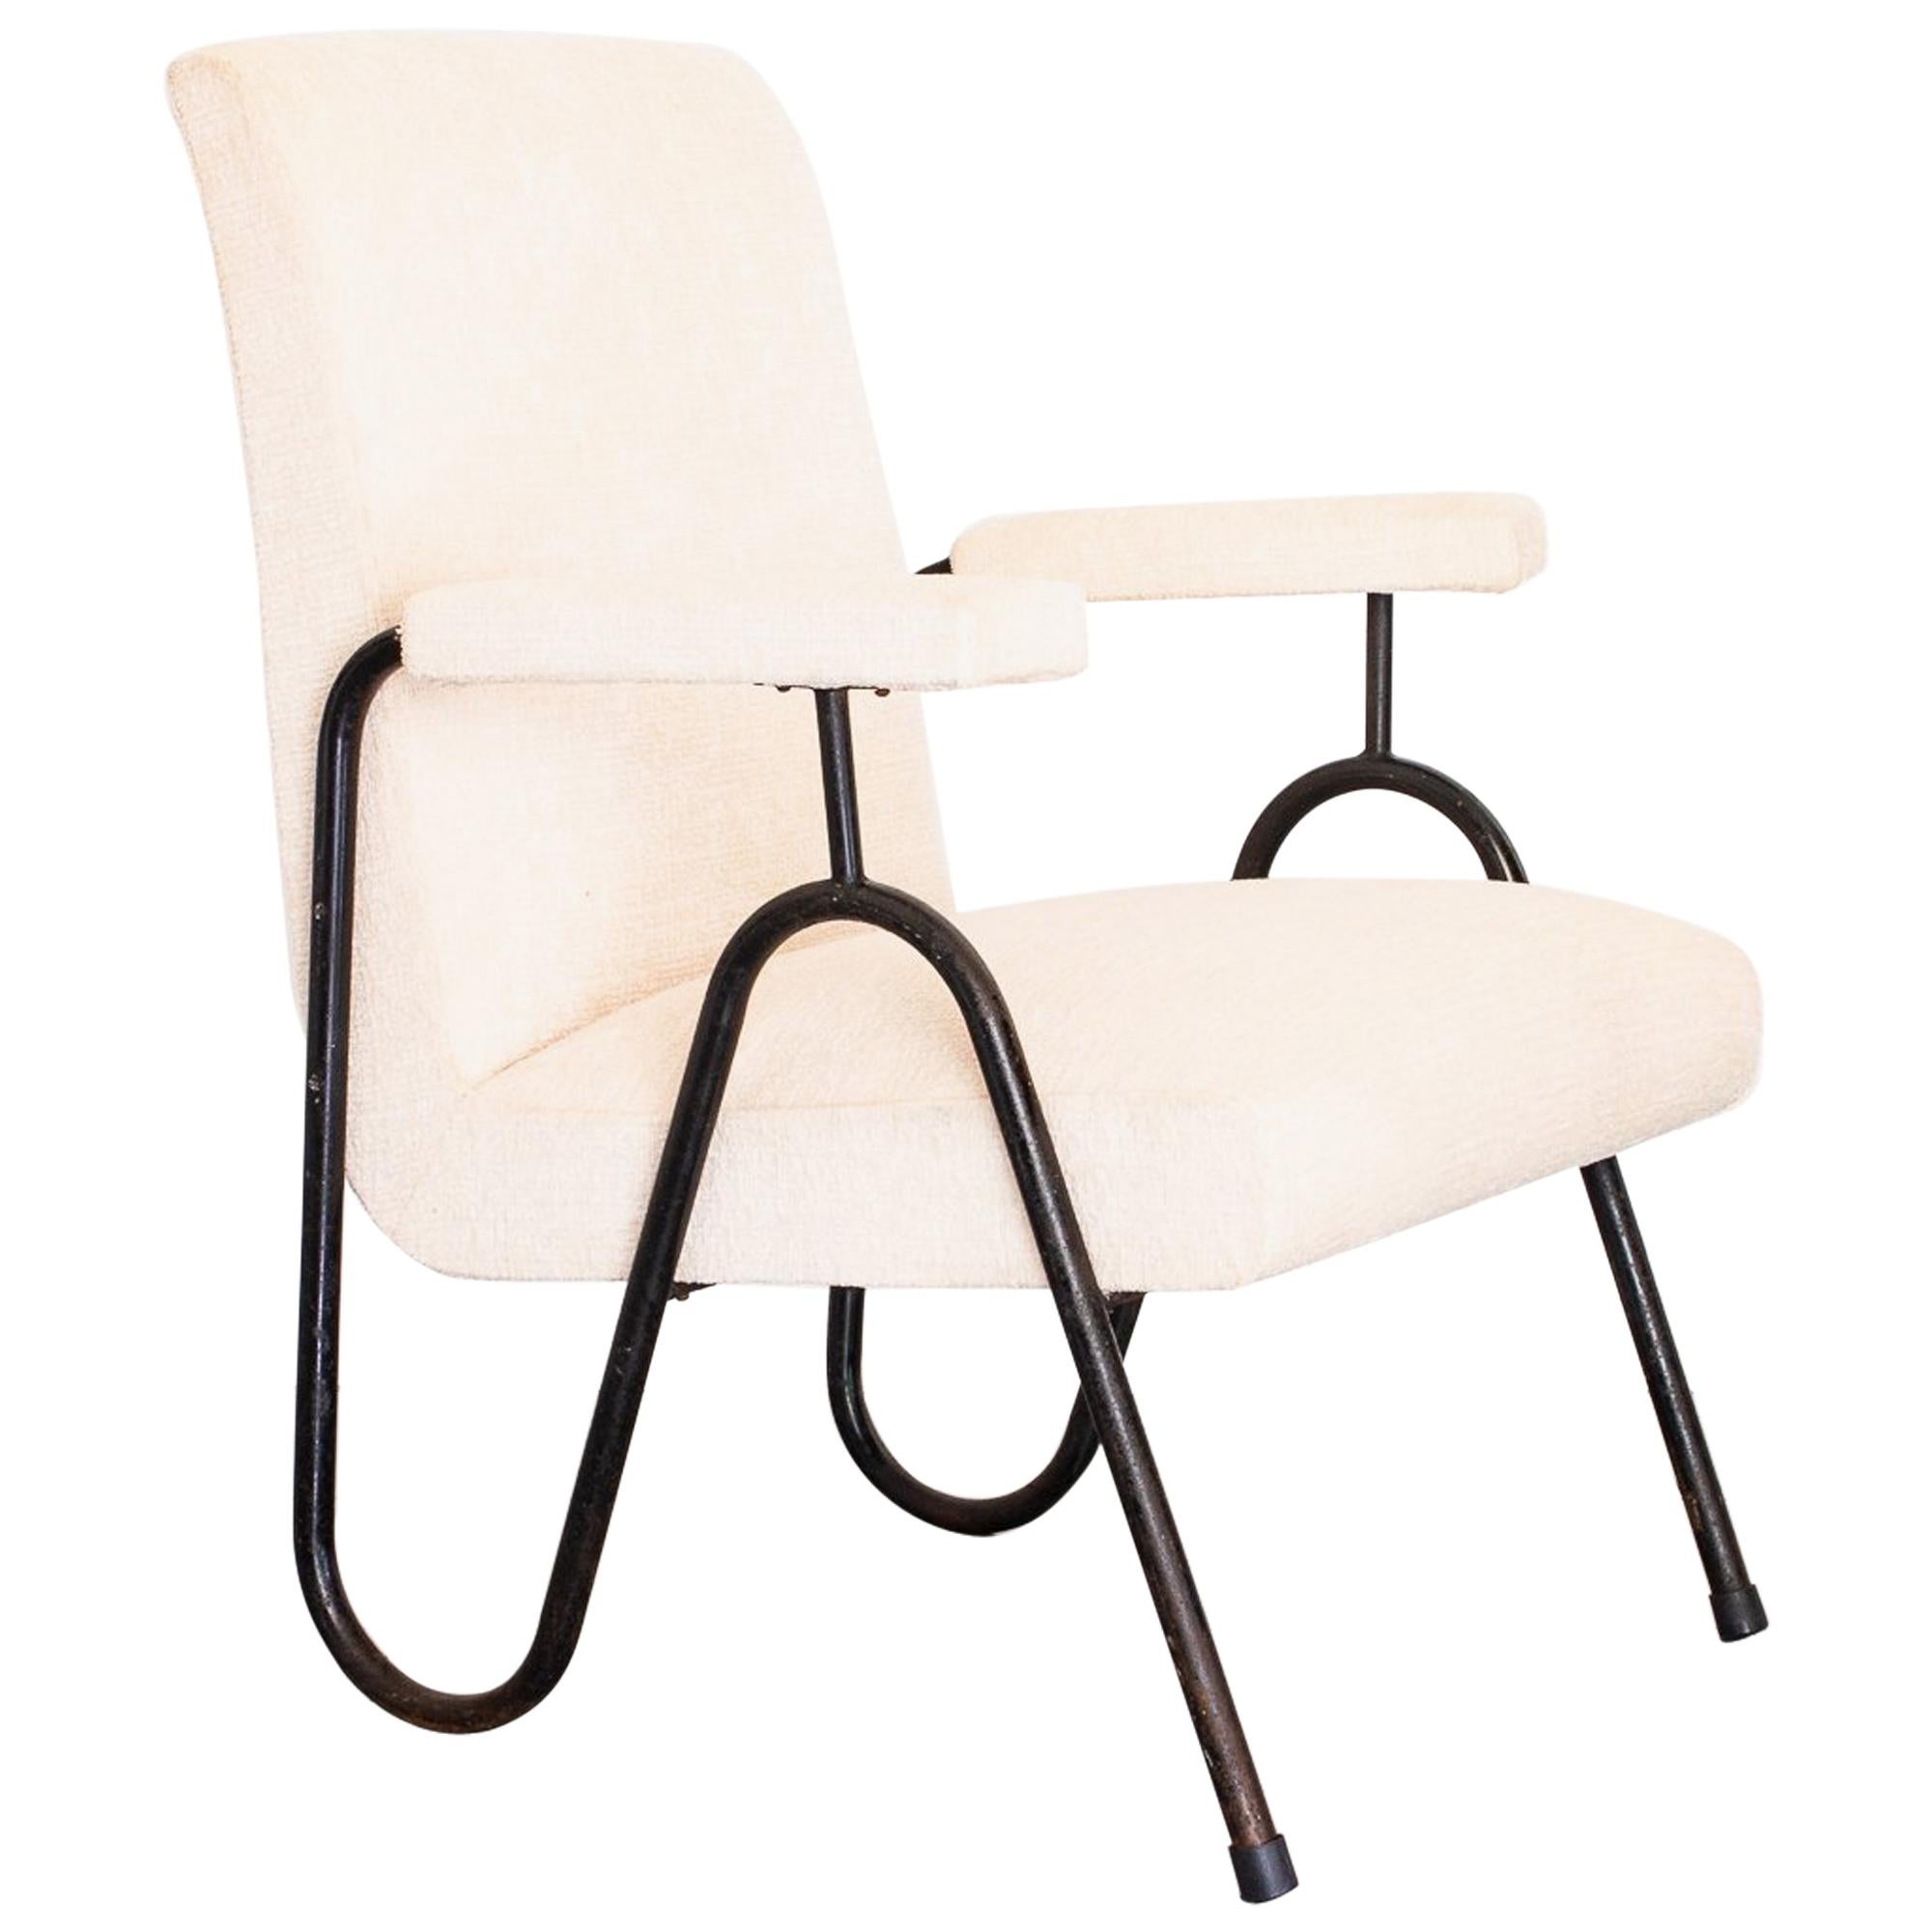 1950s "Wave" Lounge Chair in Tubular Iron and White Chenille, Brazil Modernism